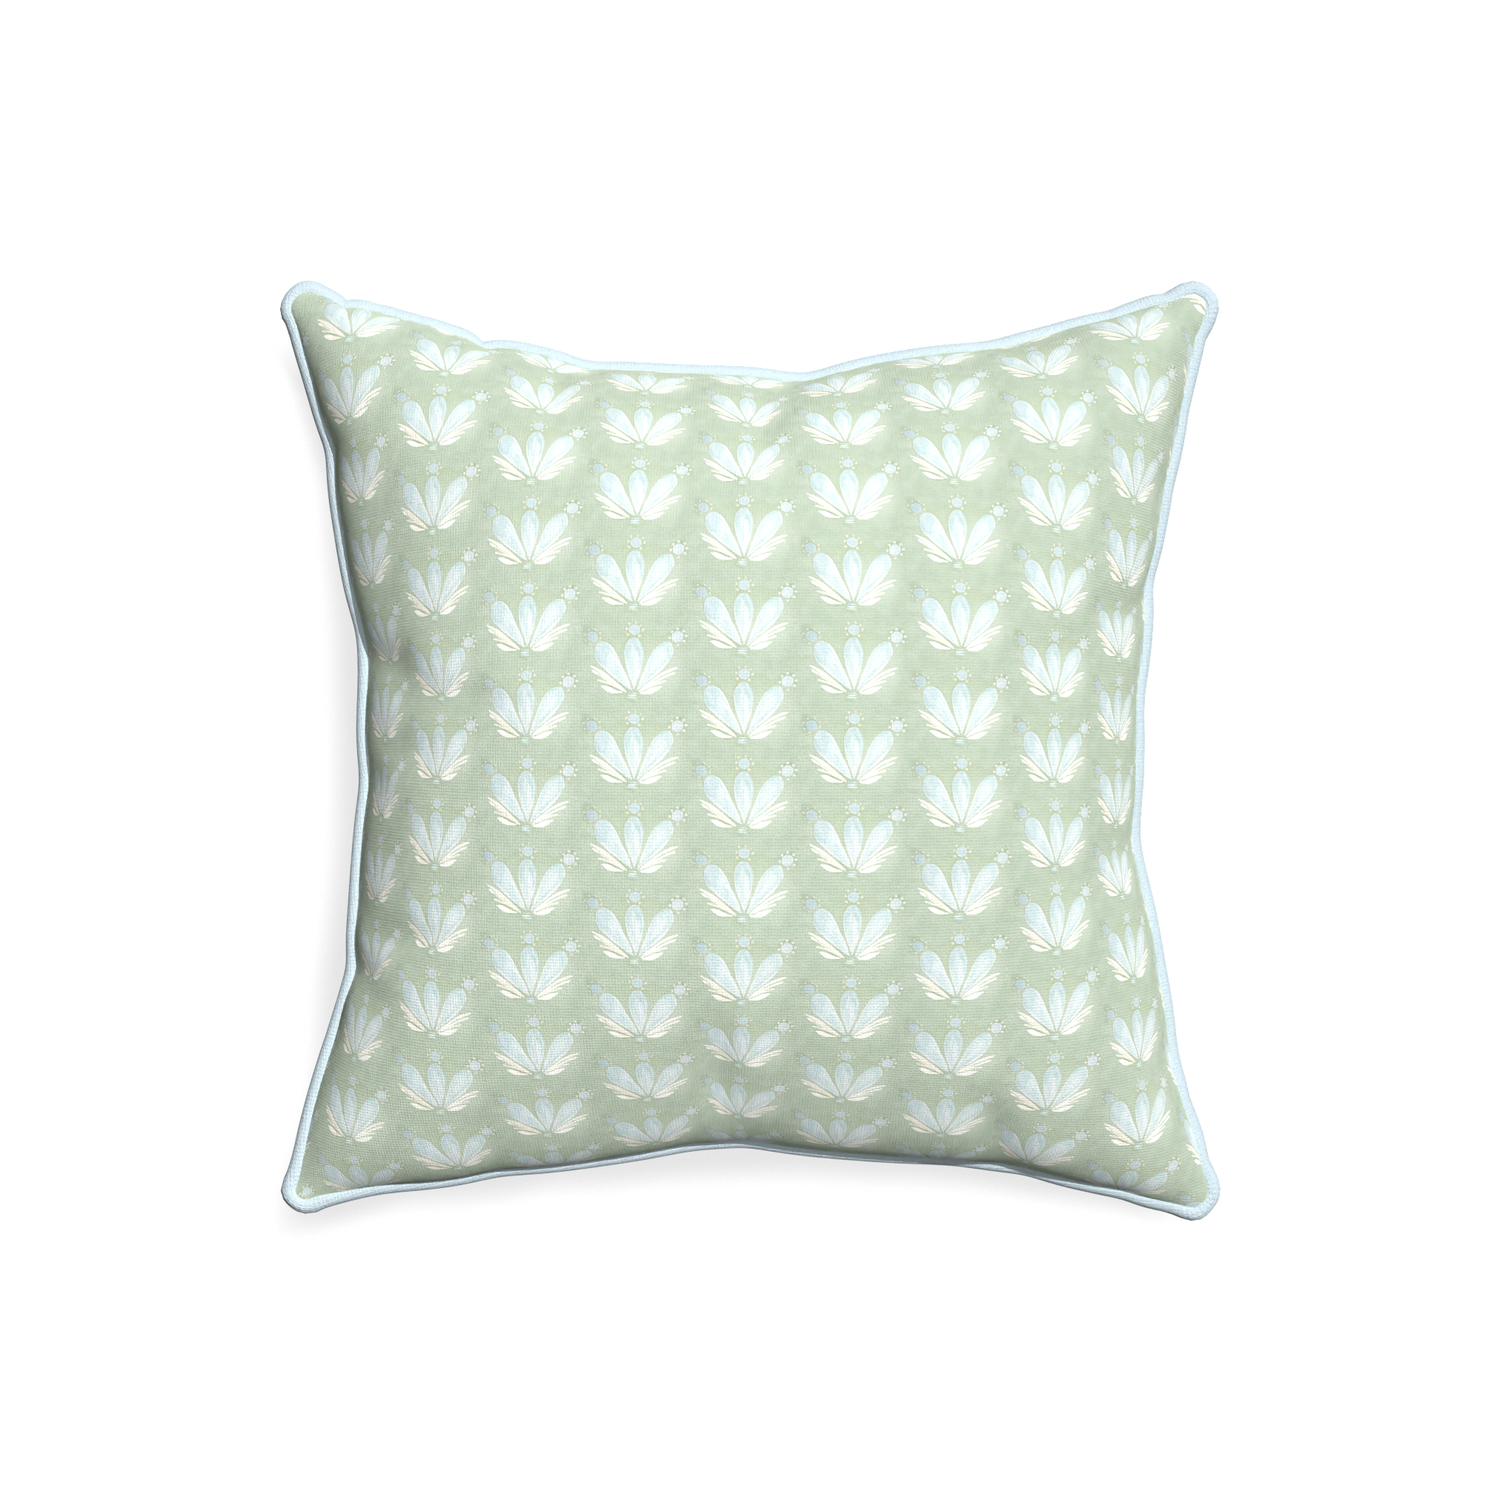 20-square serena sea salt custom pillow with powder piping on white background